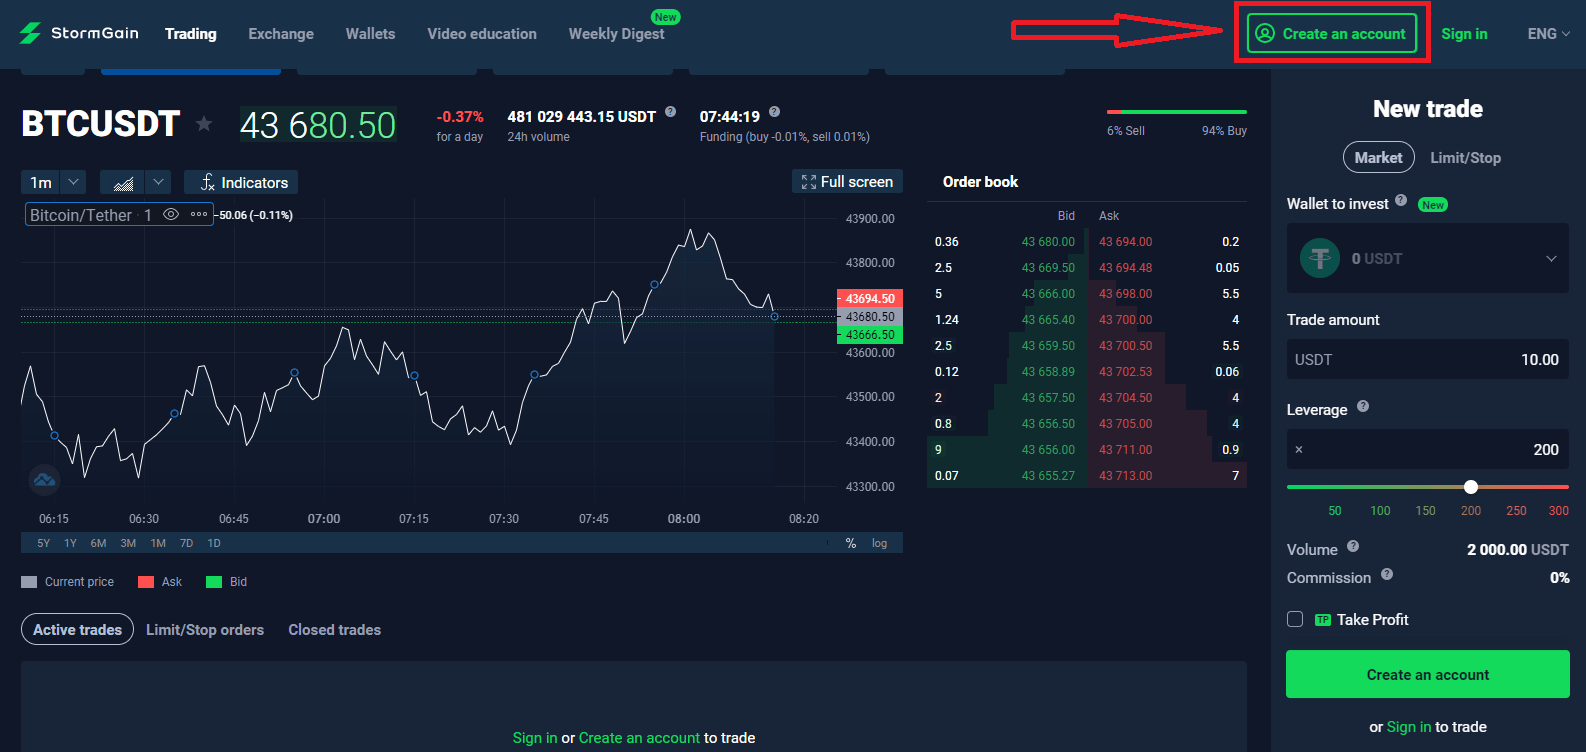 How to Register and Trade Crypto at StormGain